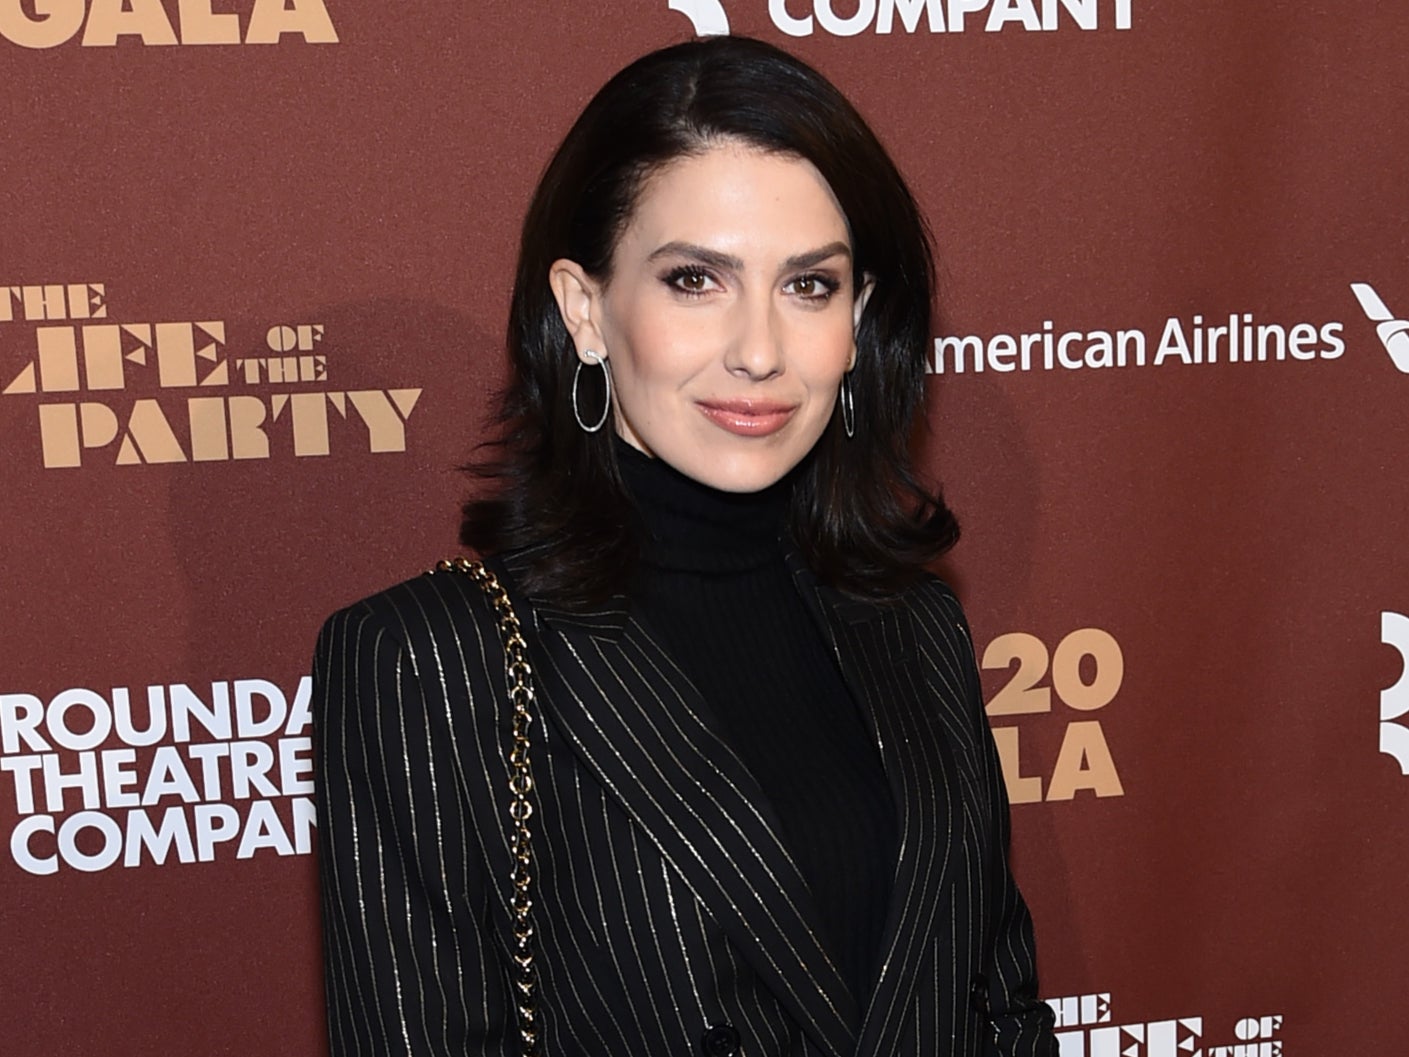 Hilaria Baldwin attends the Roundabout Theater’s 2020 Gala on 2 March 2020 in New York City